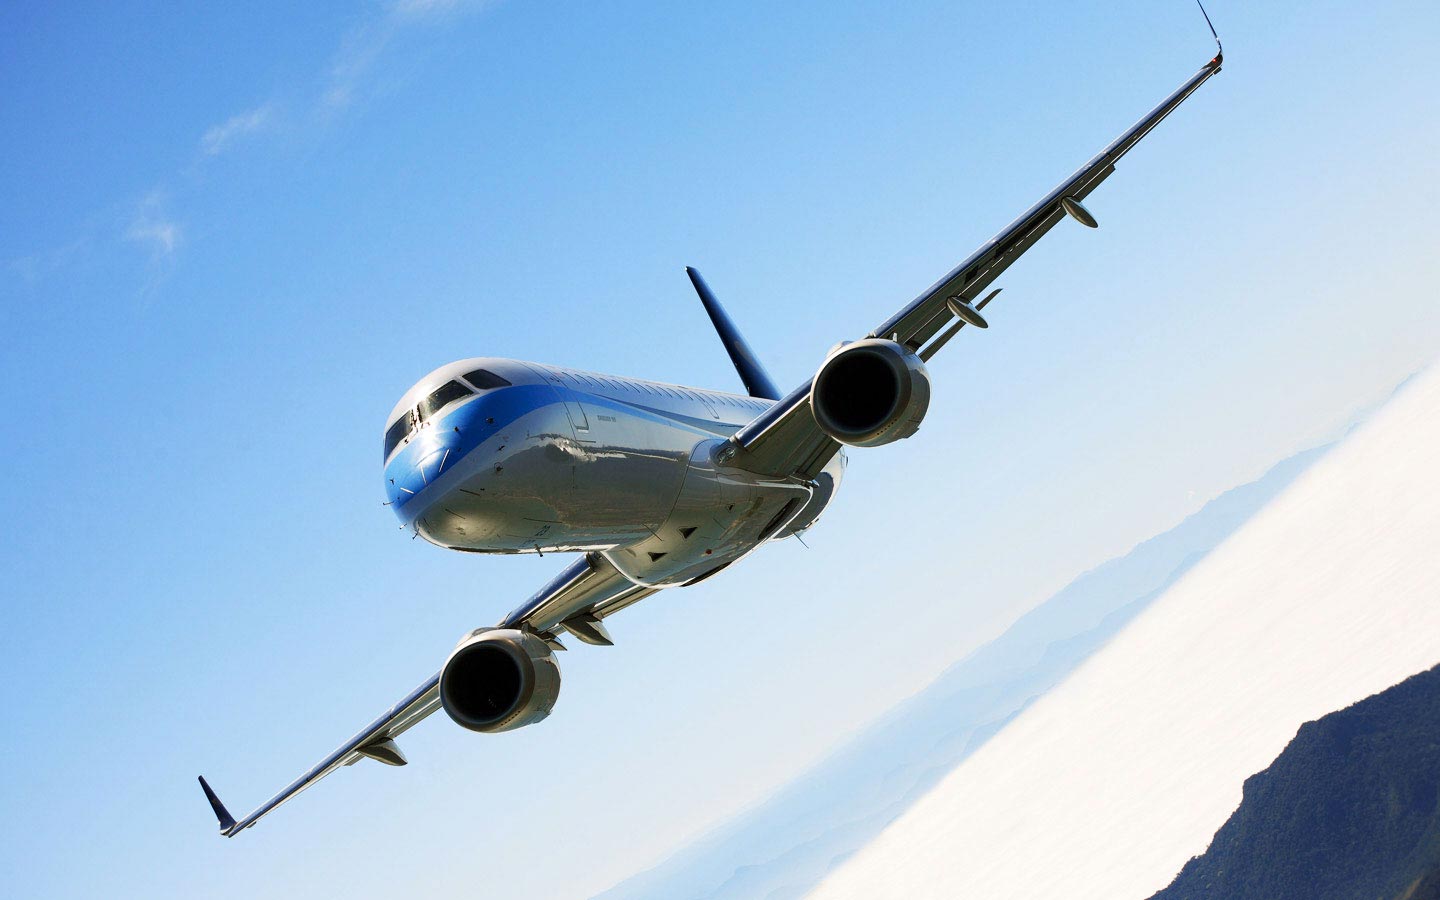 TrueNoord commits to purchase six Embraer E190 aircraft with leases attached